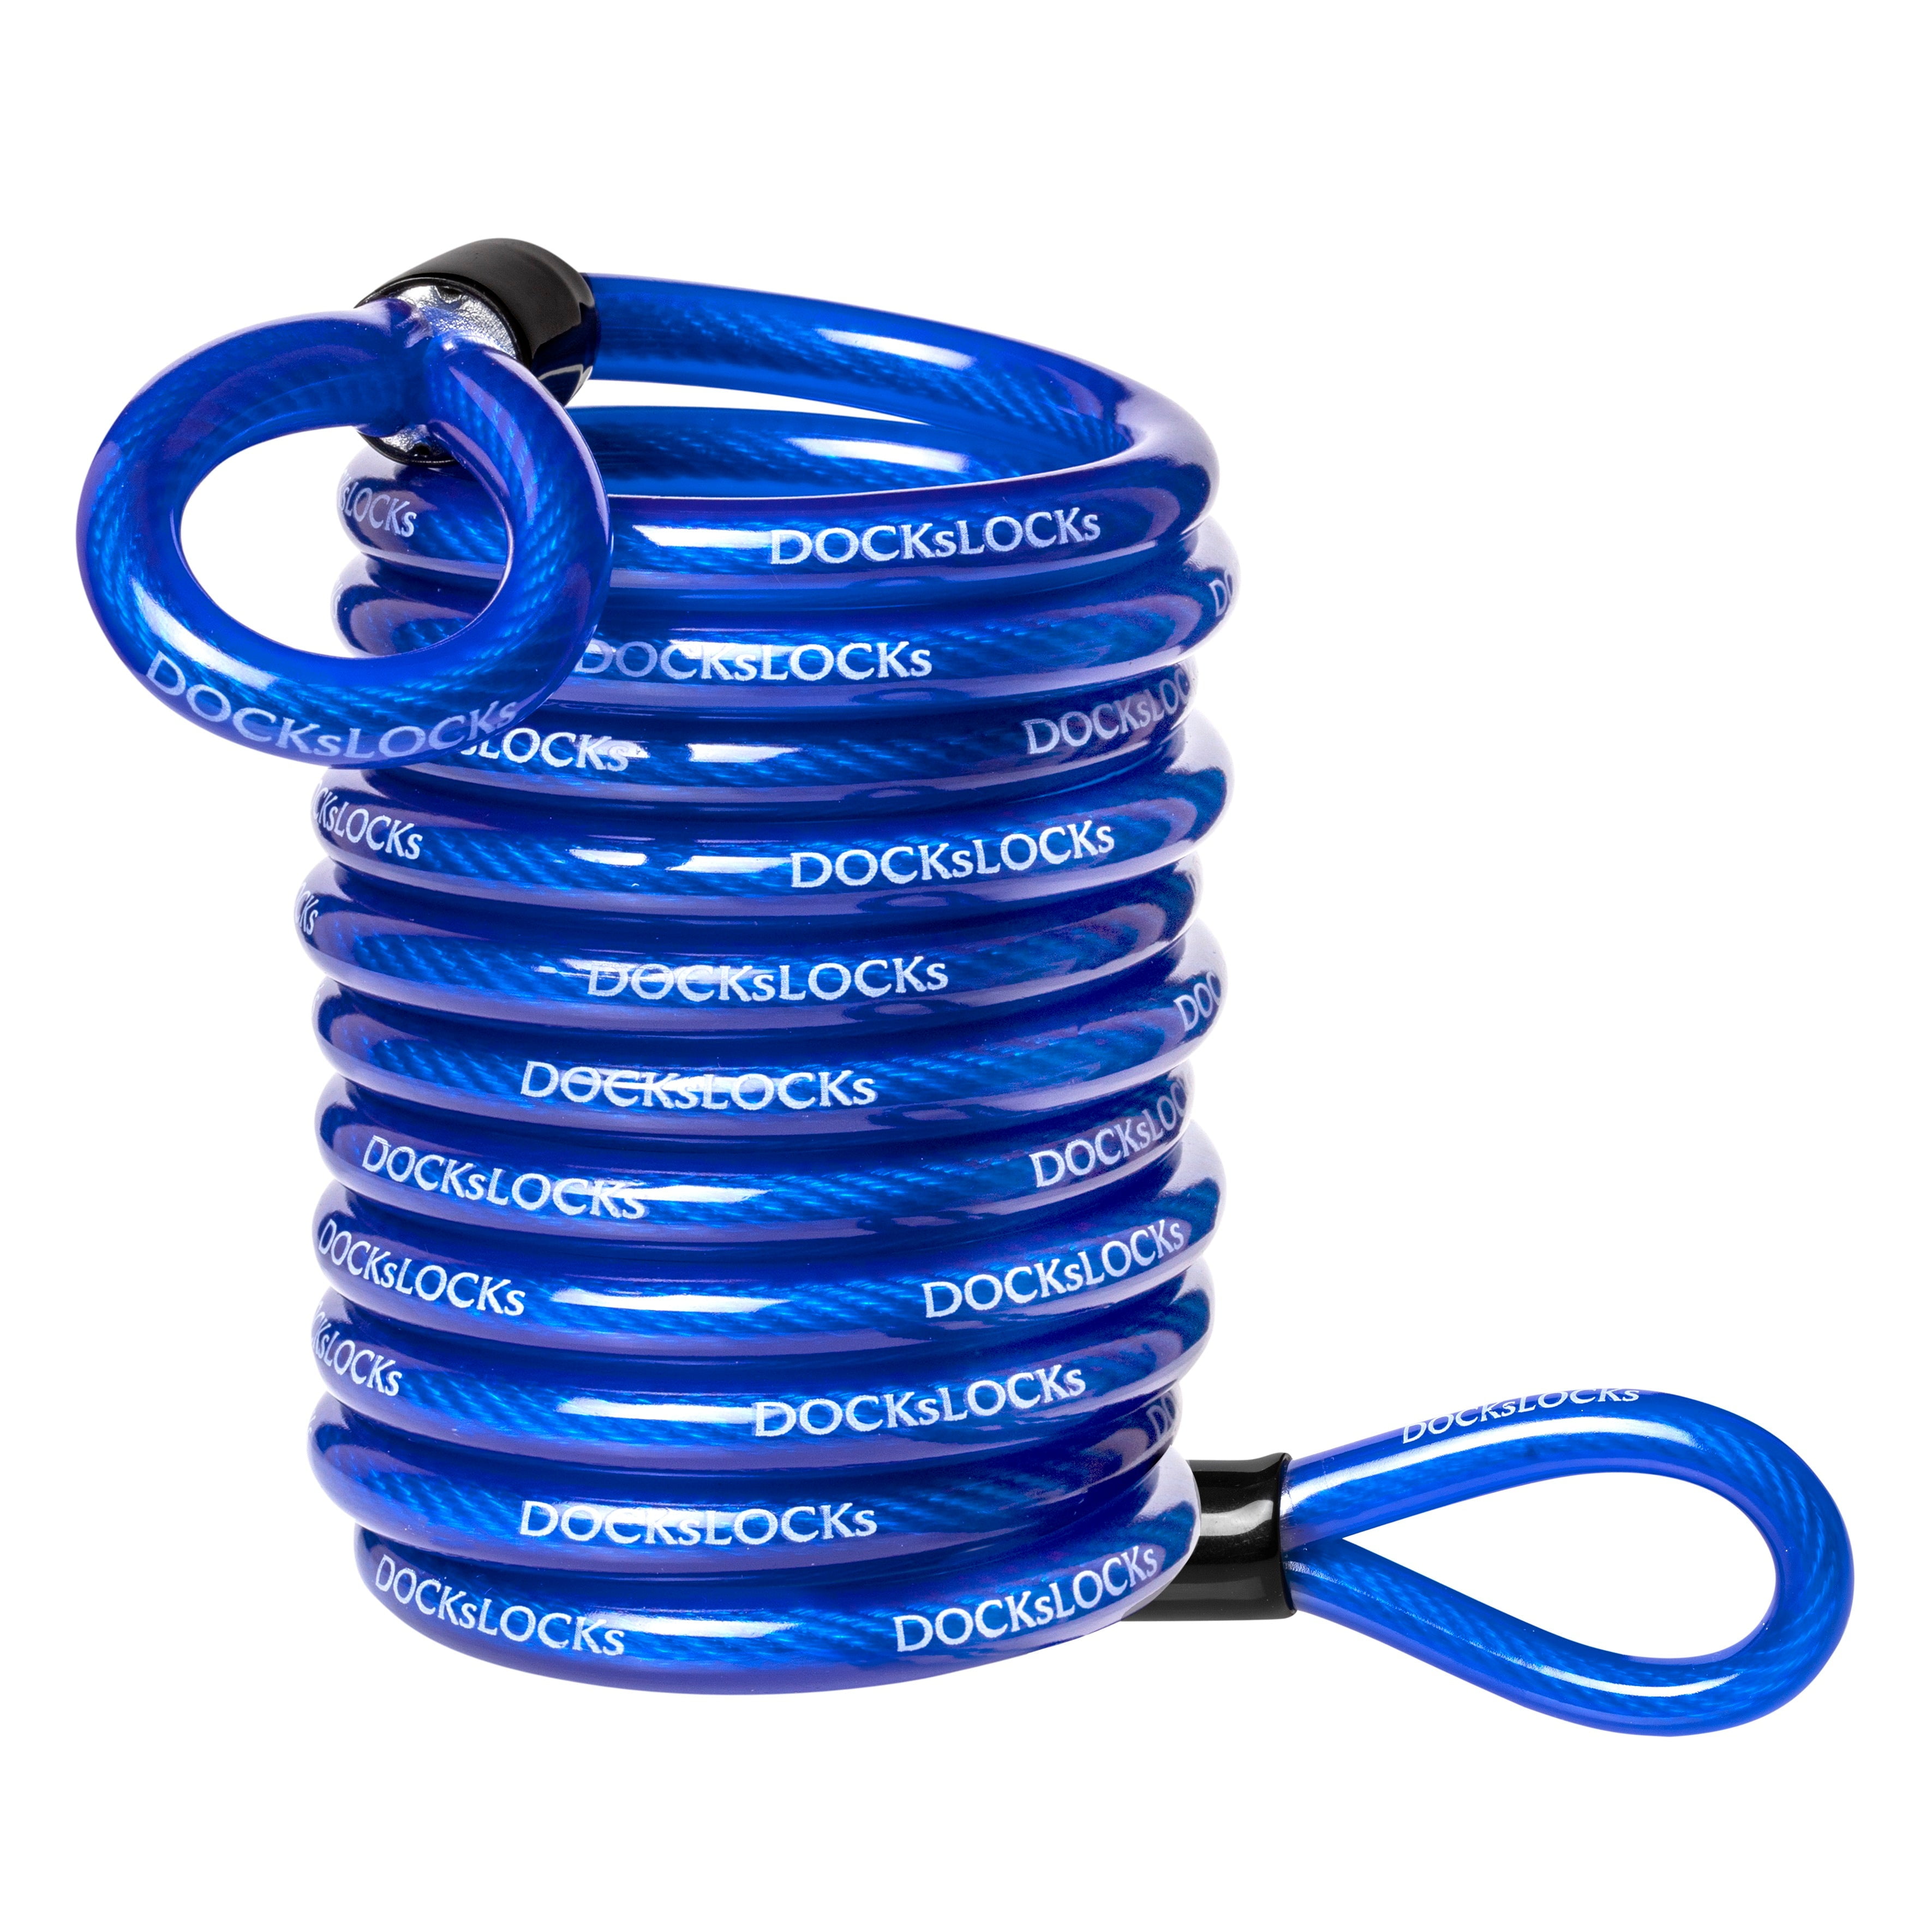 10ft Coiled Combination Cable w/ Quality Coated Steel Re-Settable & Easy Storage 